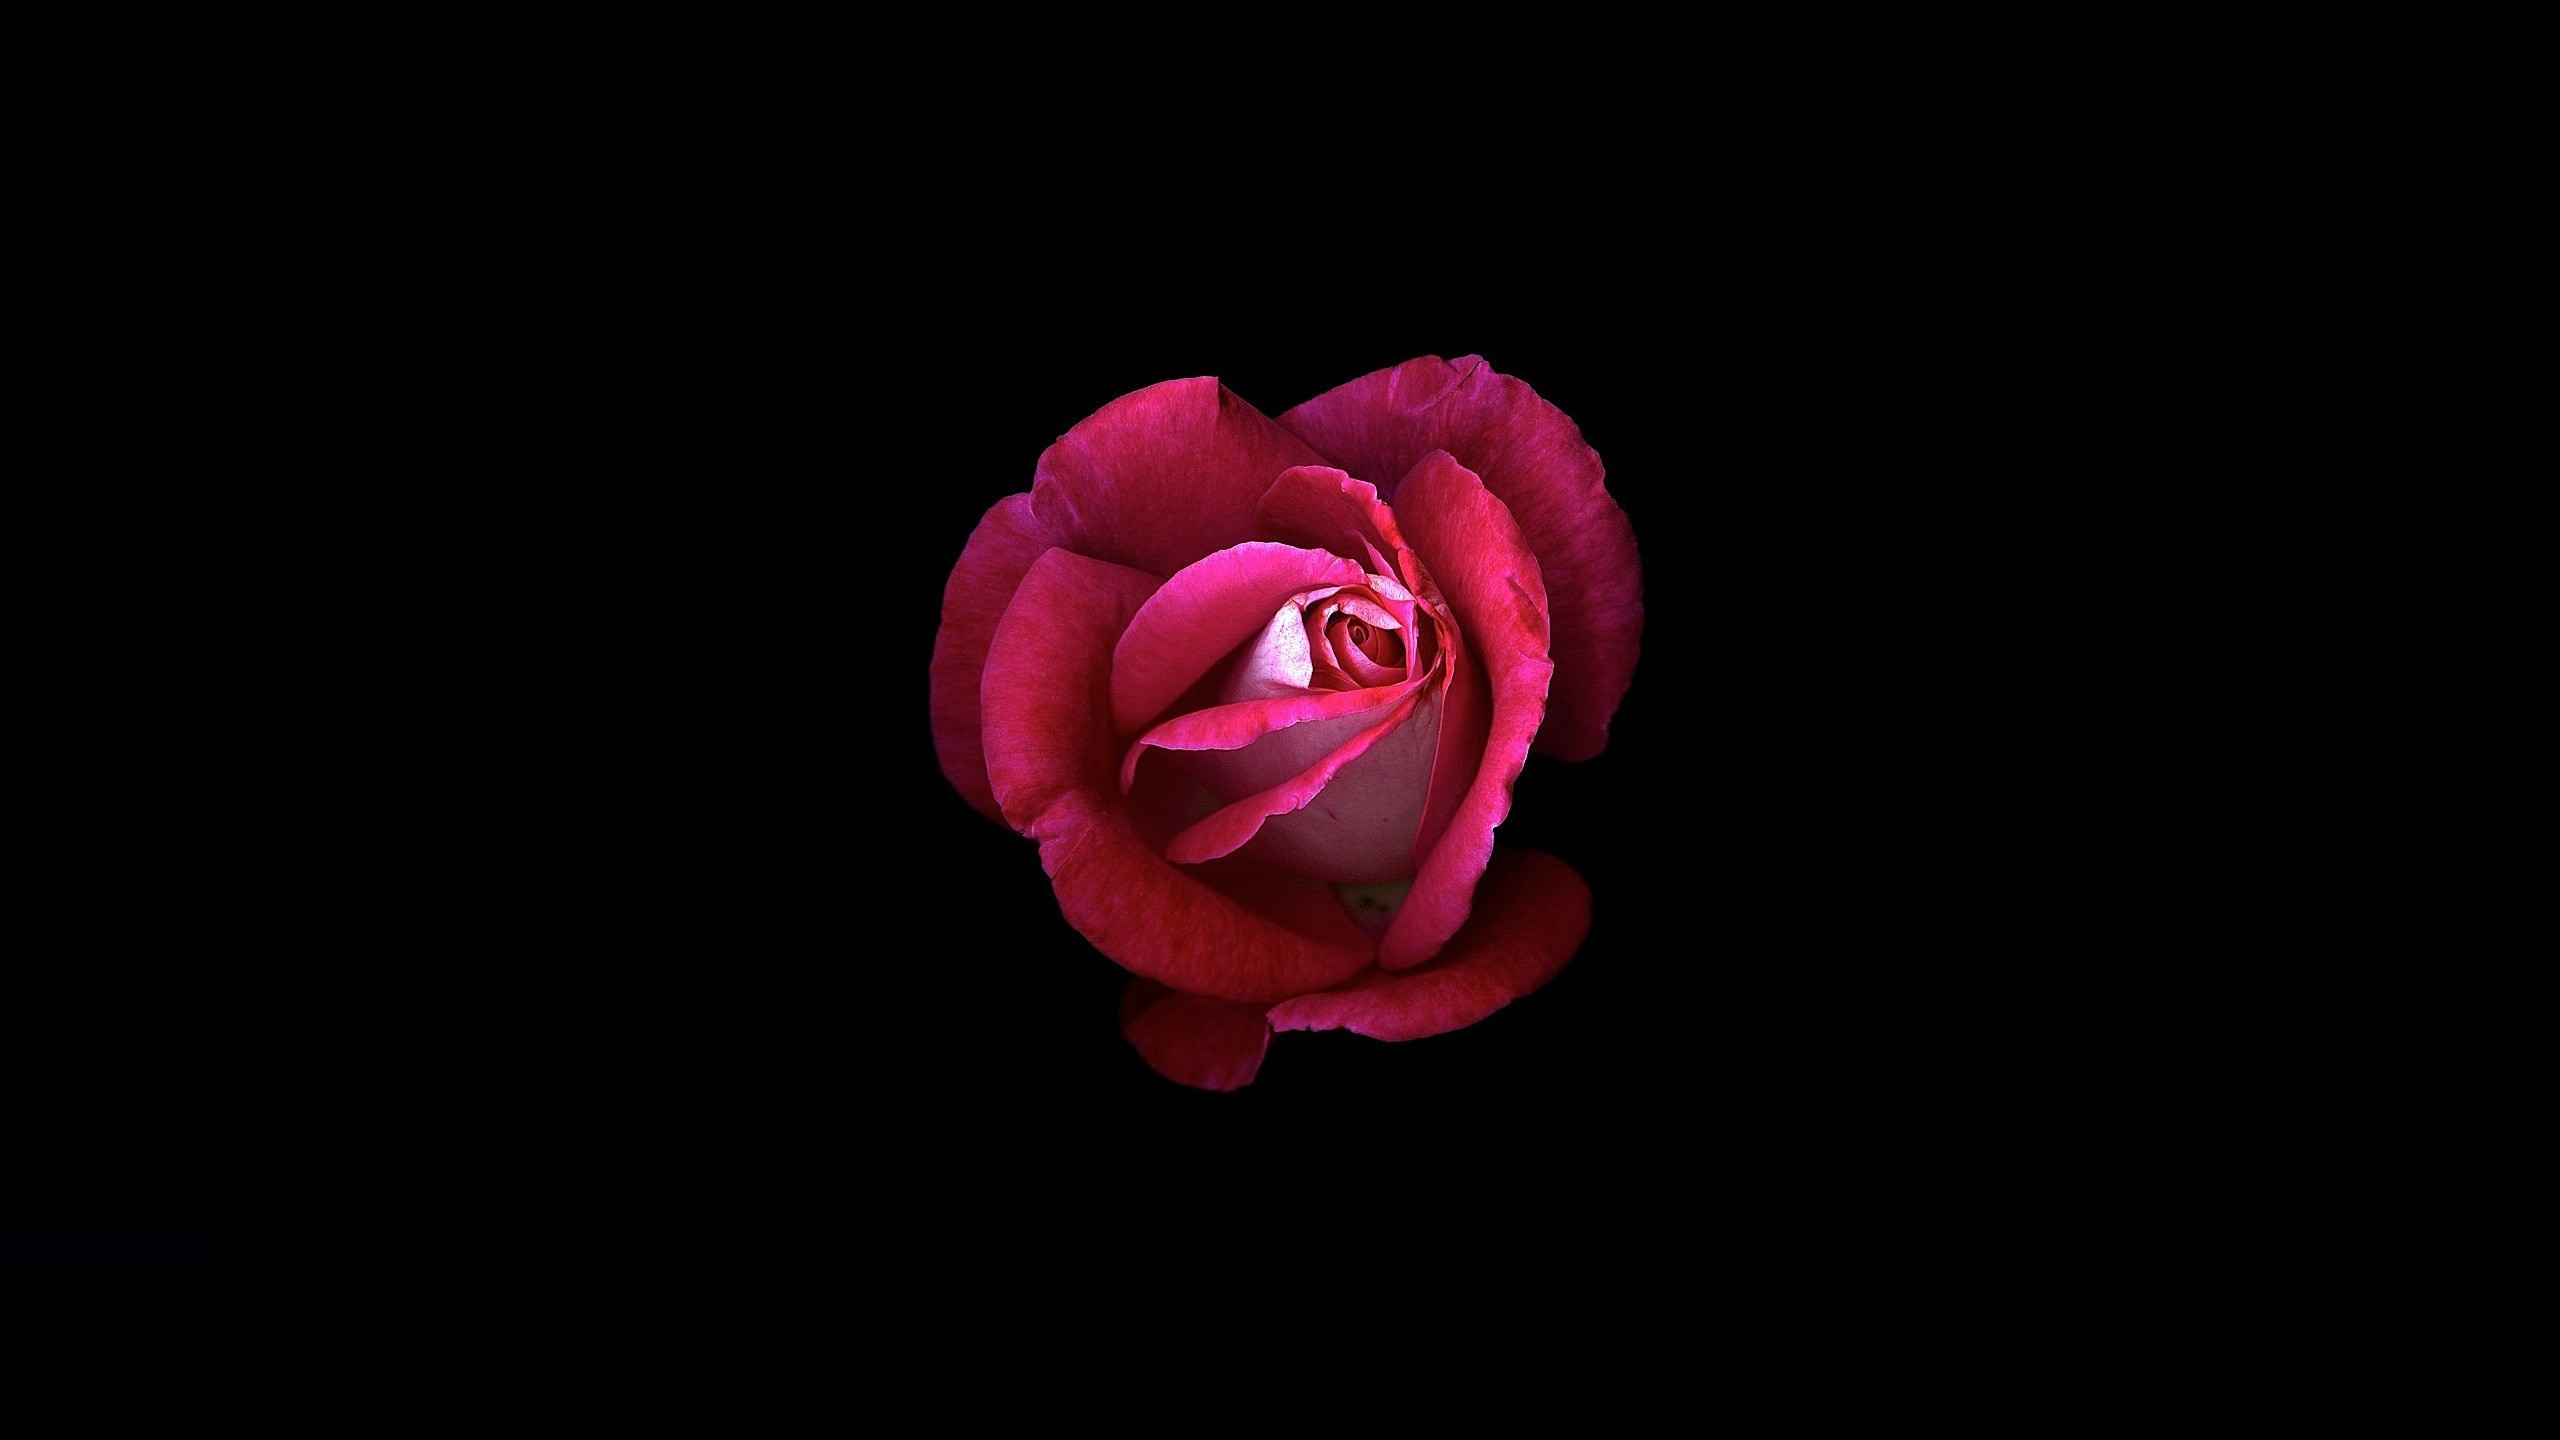 2560x1440 Black Wallpaper with Pink Roses New Wallpaper Pink Rose Dark Background Hd  Flowers 929